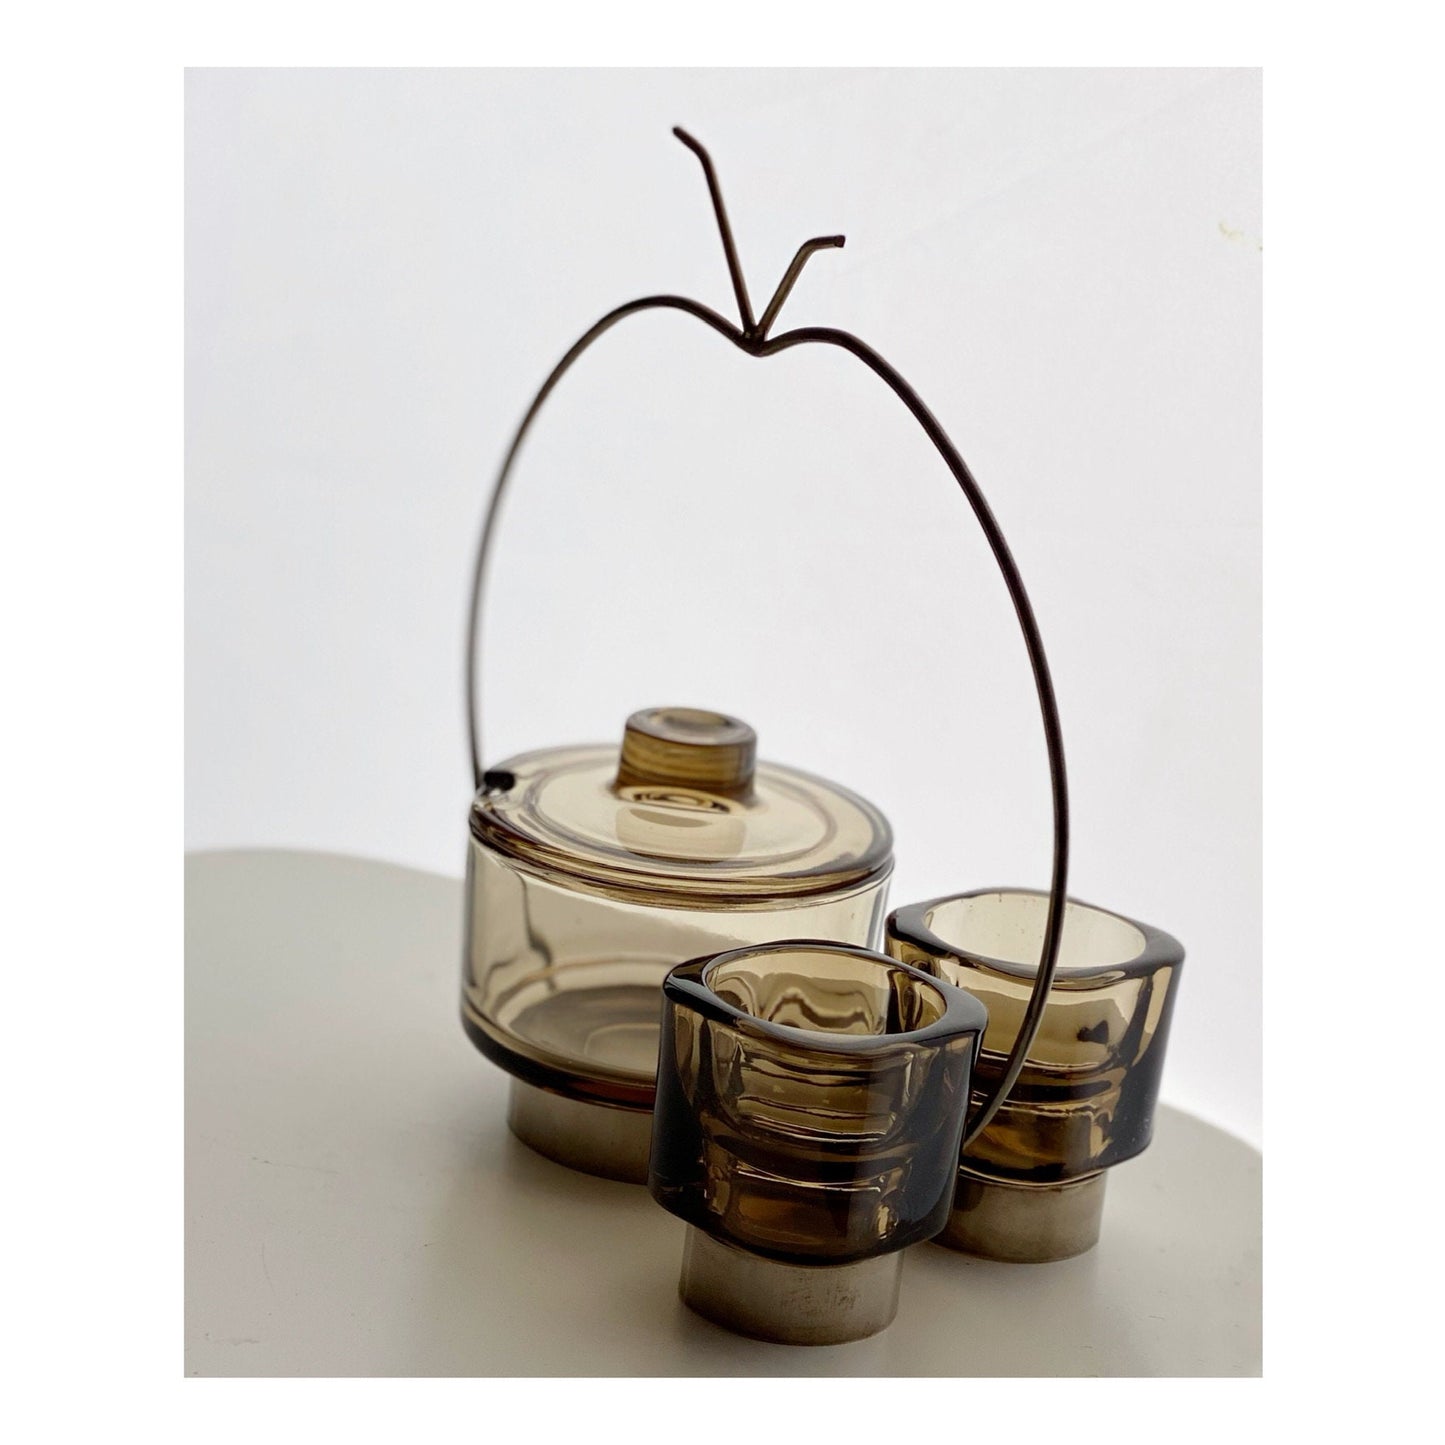 Fidenza Vetraria smoked glass compote  and lidded sugar bowl, Italy from the 1960s